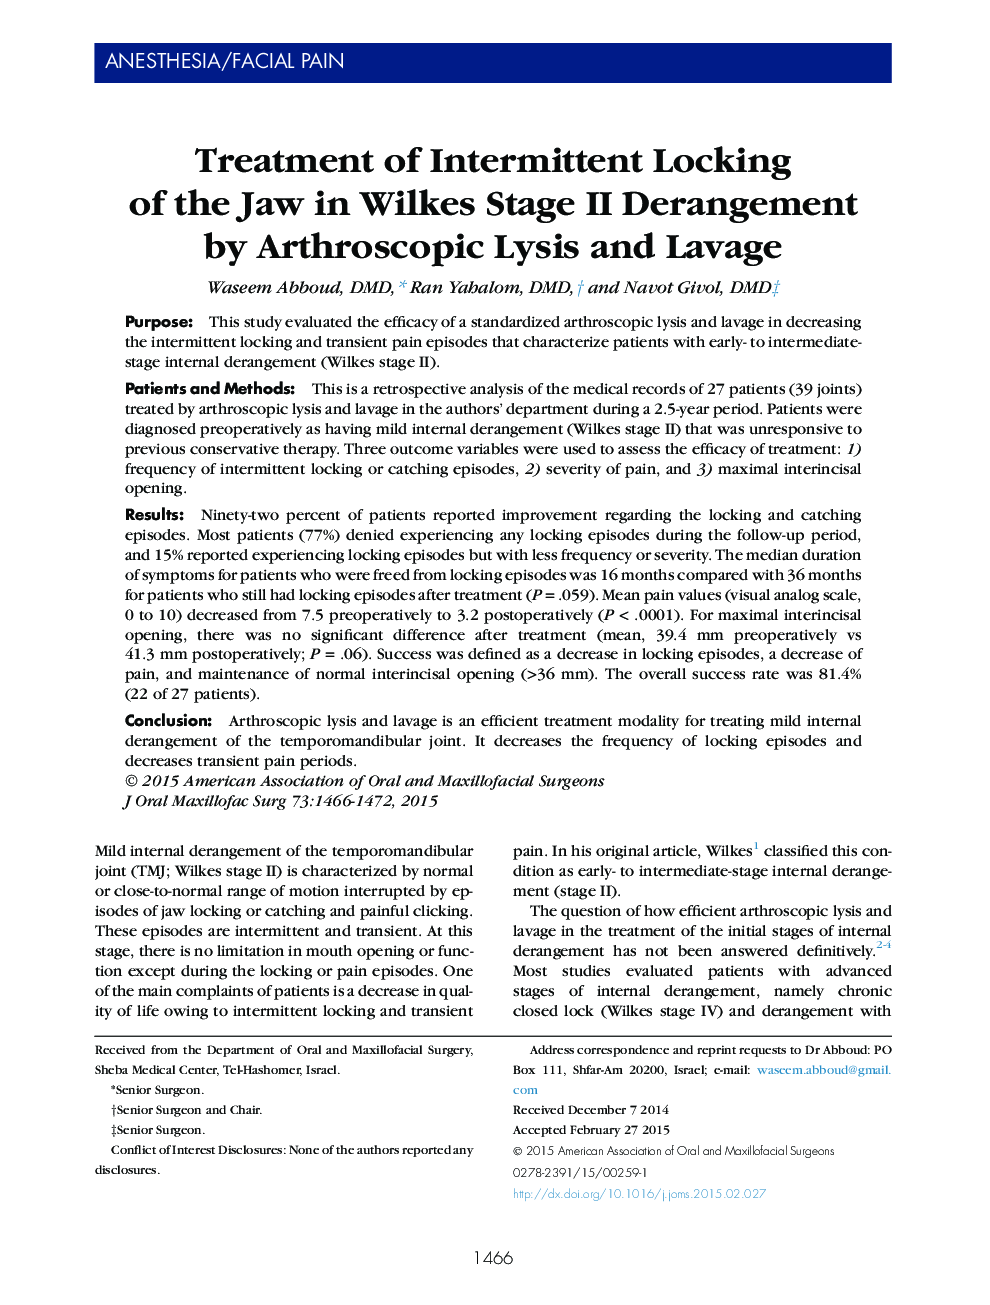 Treatment of Intermittent Locking of the Jaw in Wilkes Stage II Derangement by Arthroscopic Lysis and Lavage 